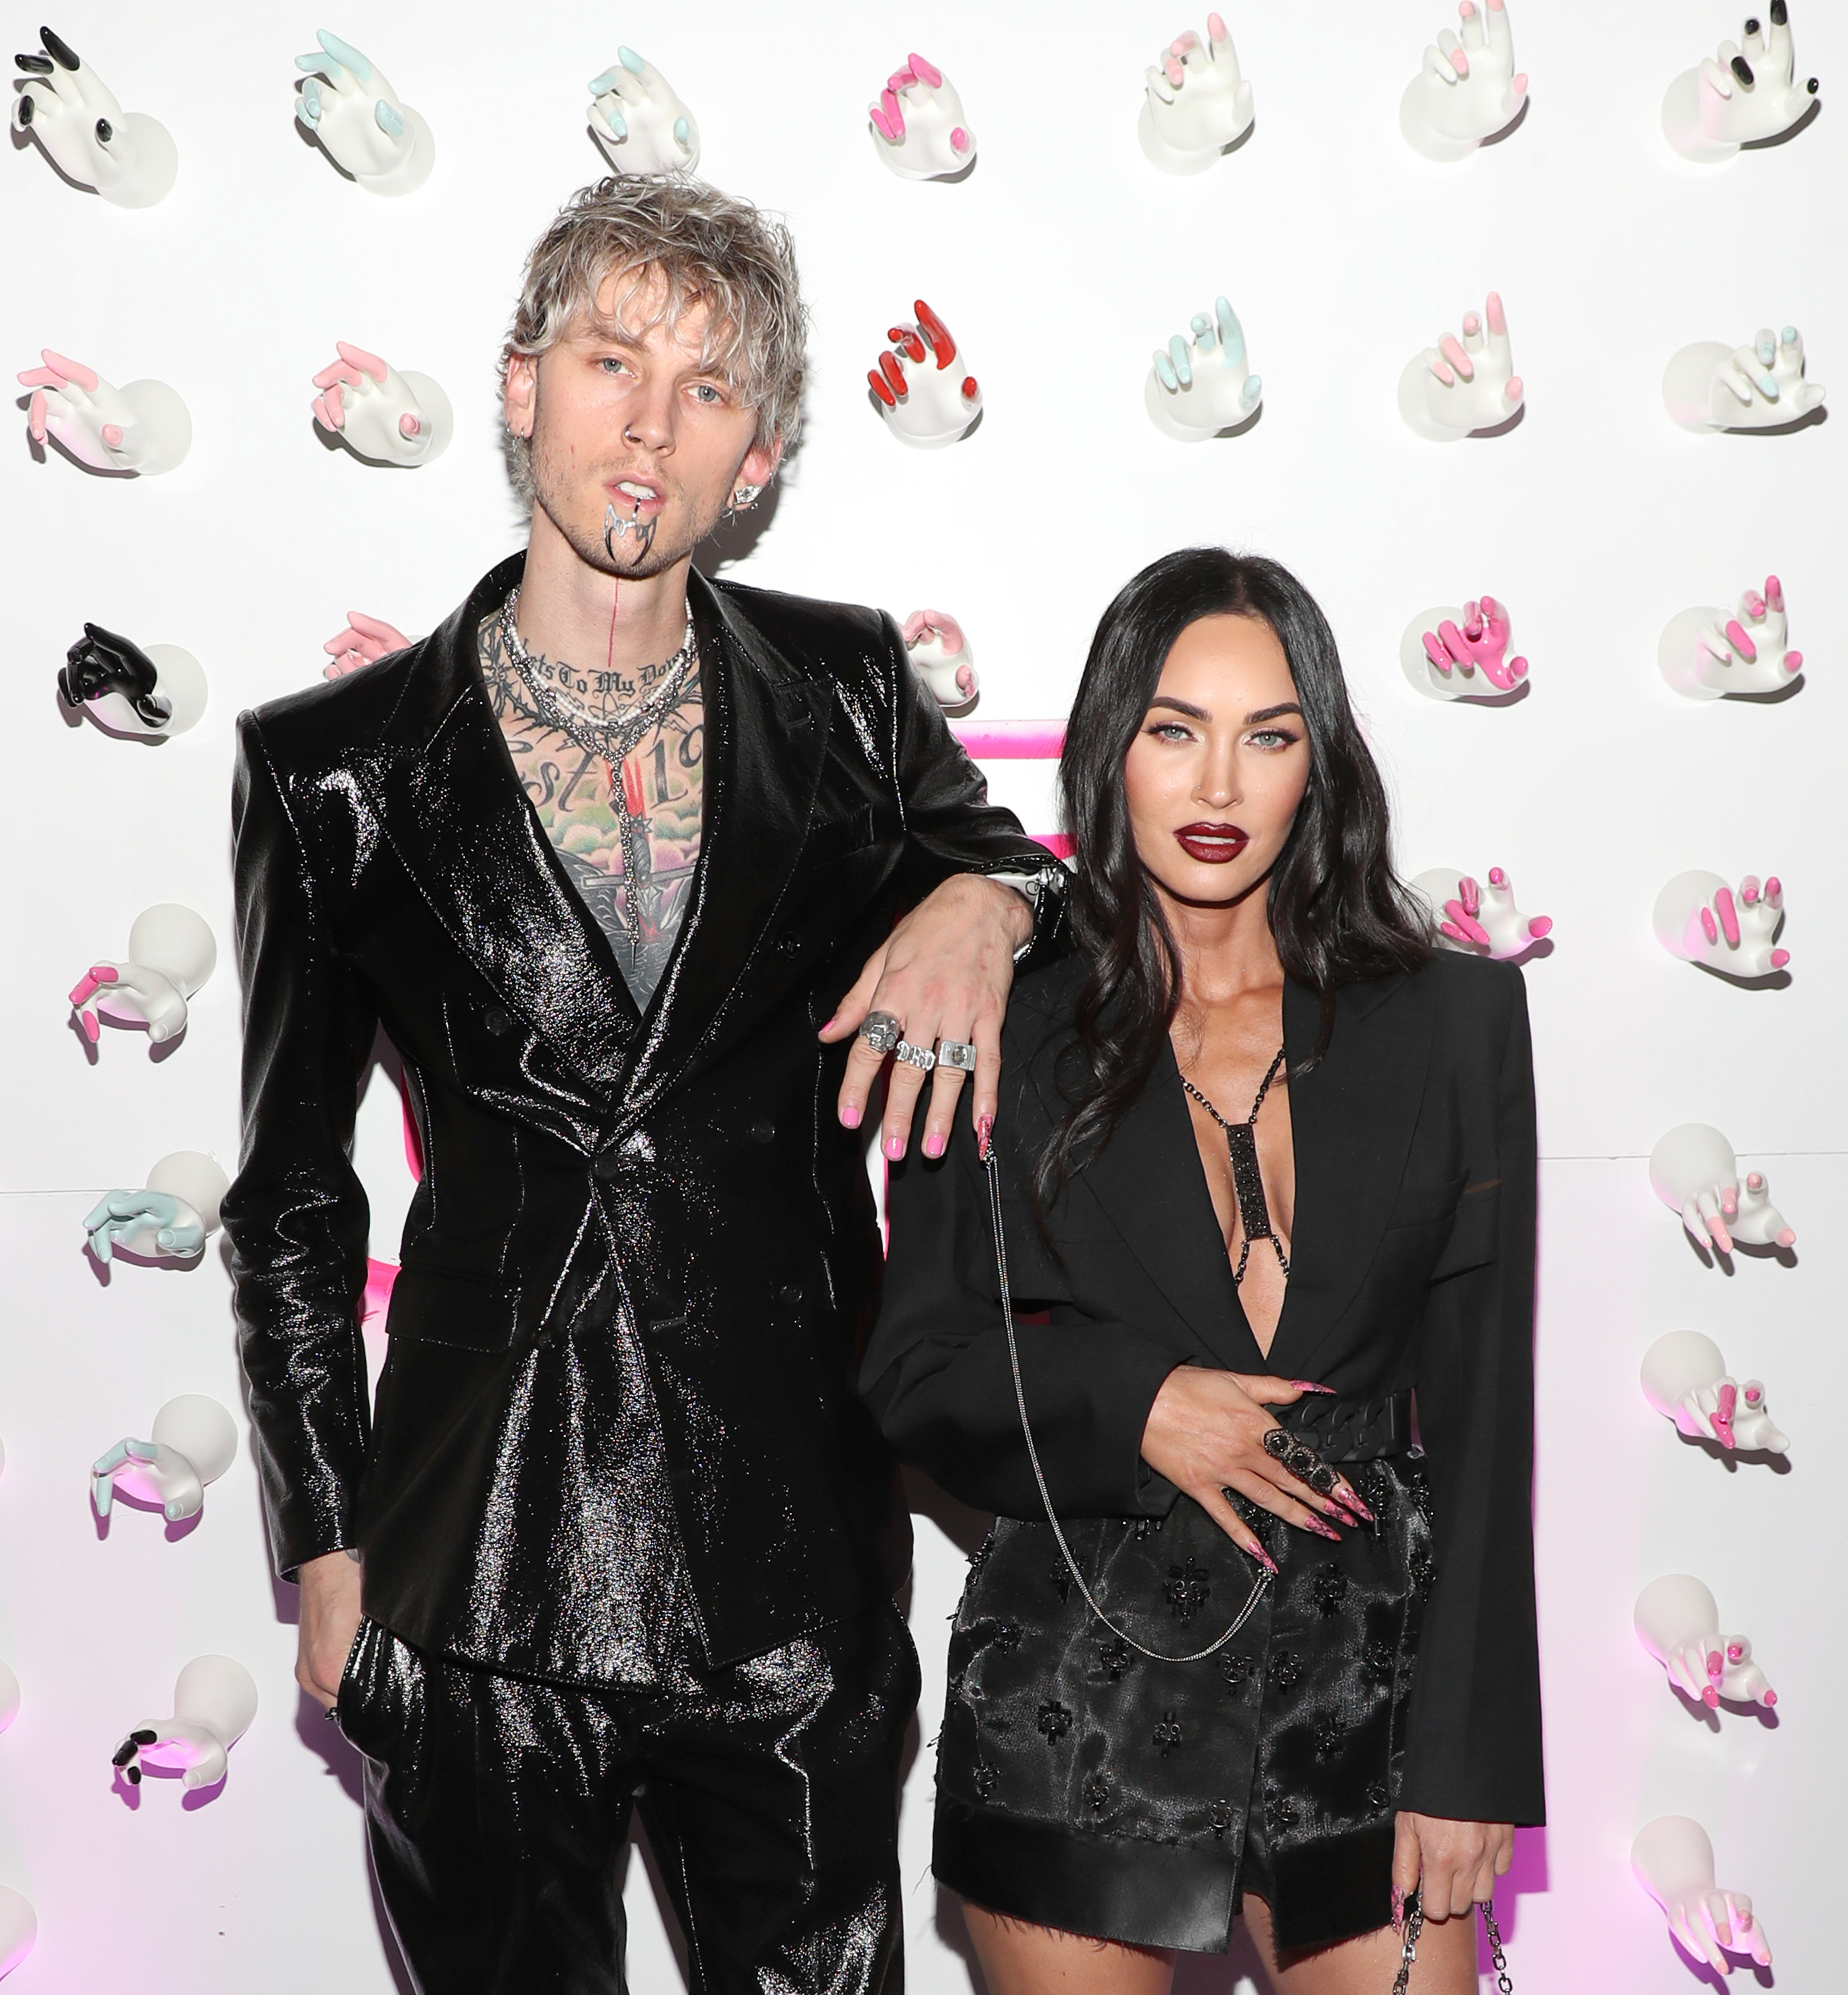 MGK leaning his arm on Megan&#x27;s shoulder on the red carpet